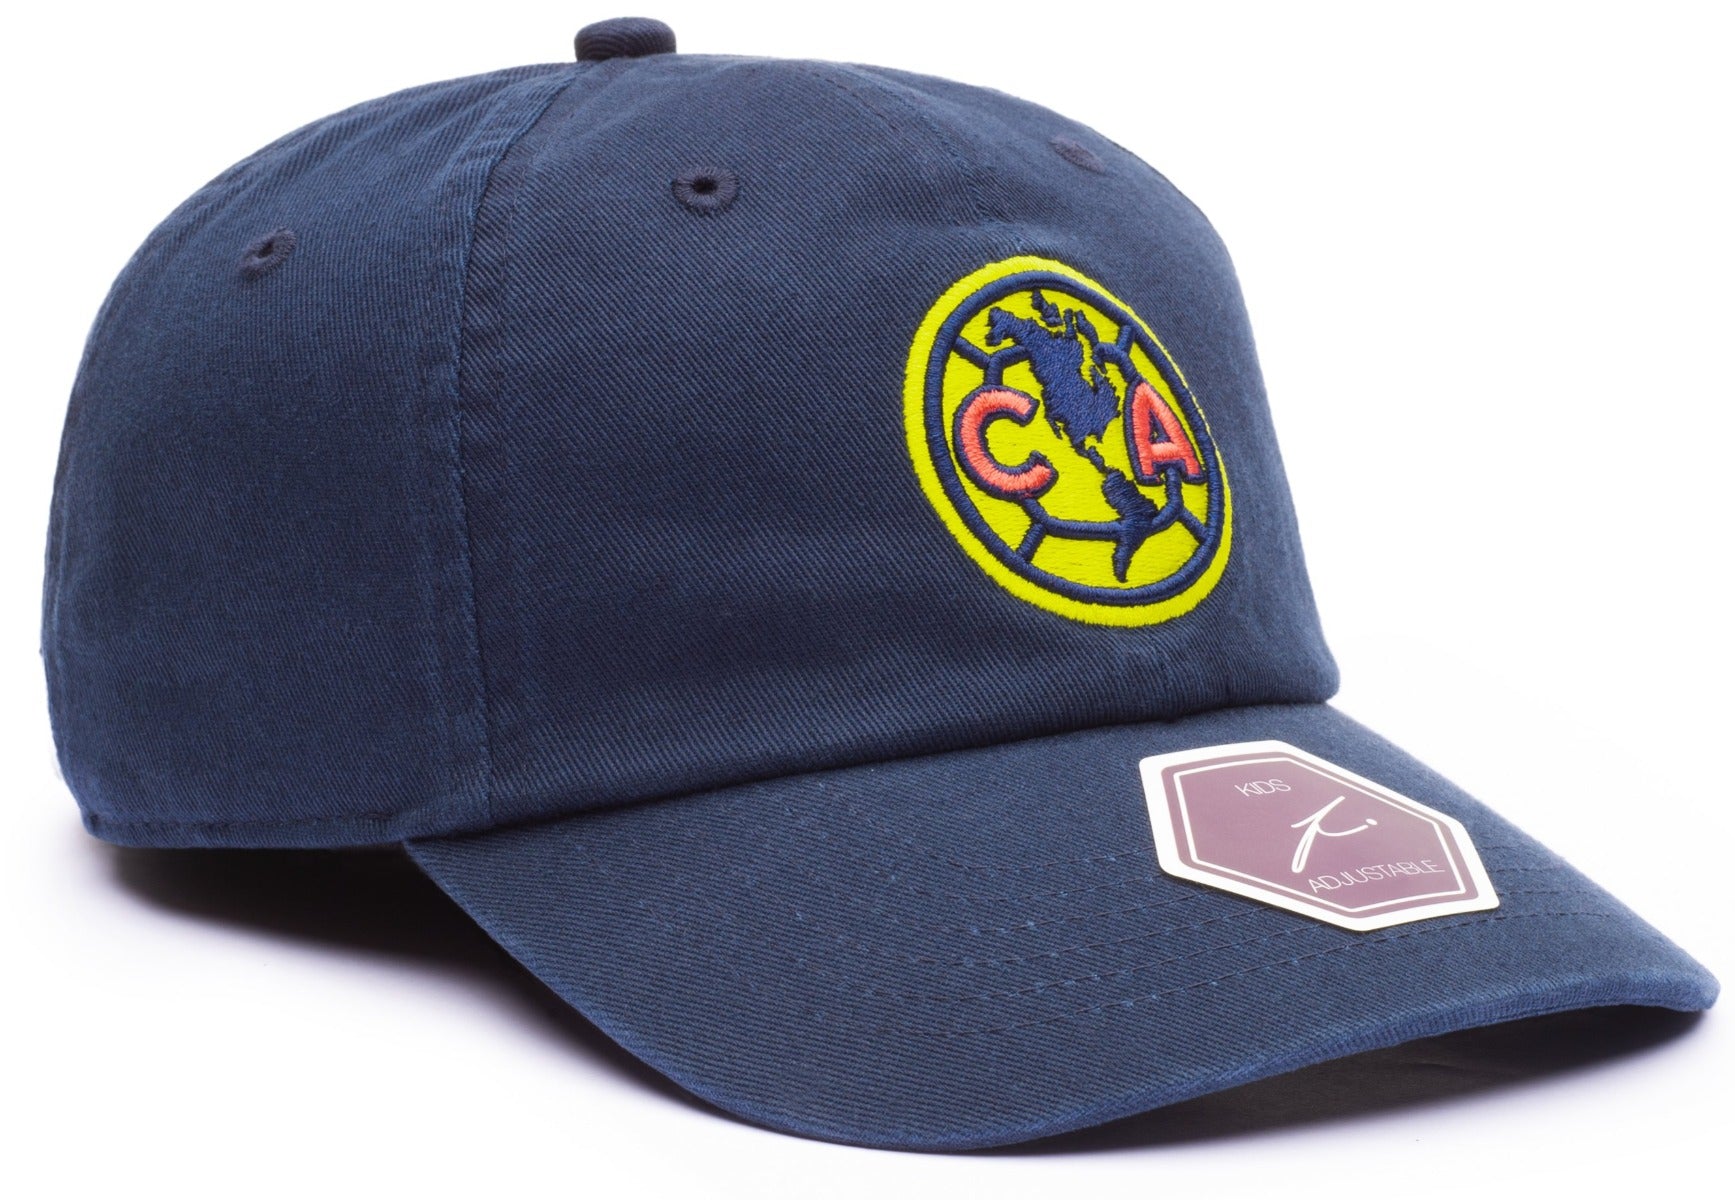 FI COLLECTION CLUB AMERICA YOUTH NAVY ADJUSTABLE CAP